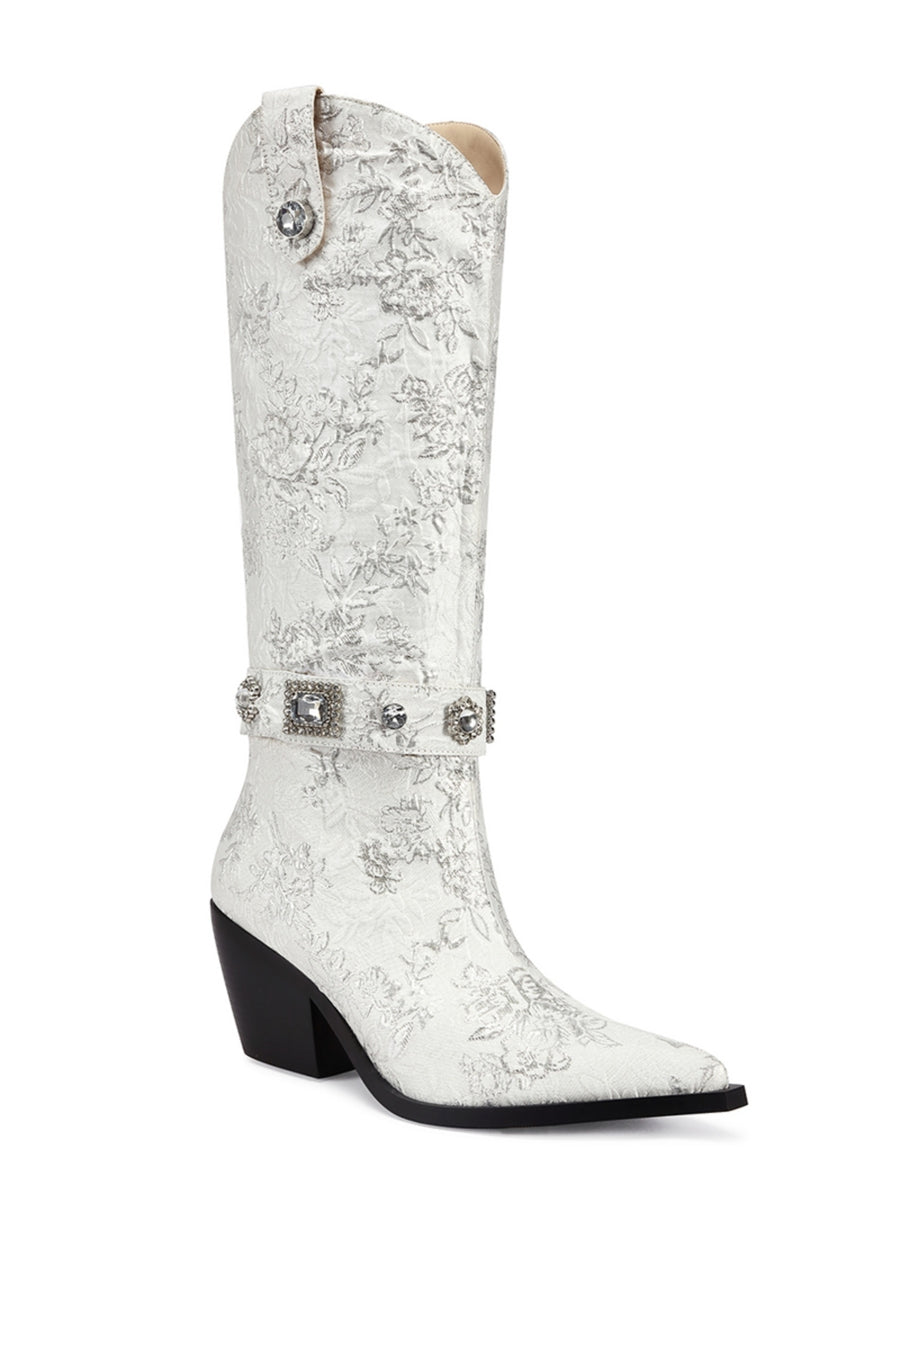 angled view of white satin floral print statement western boot with crystal embellished belted accents and a black block heel